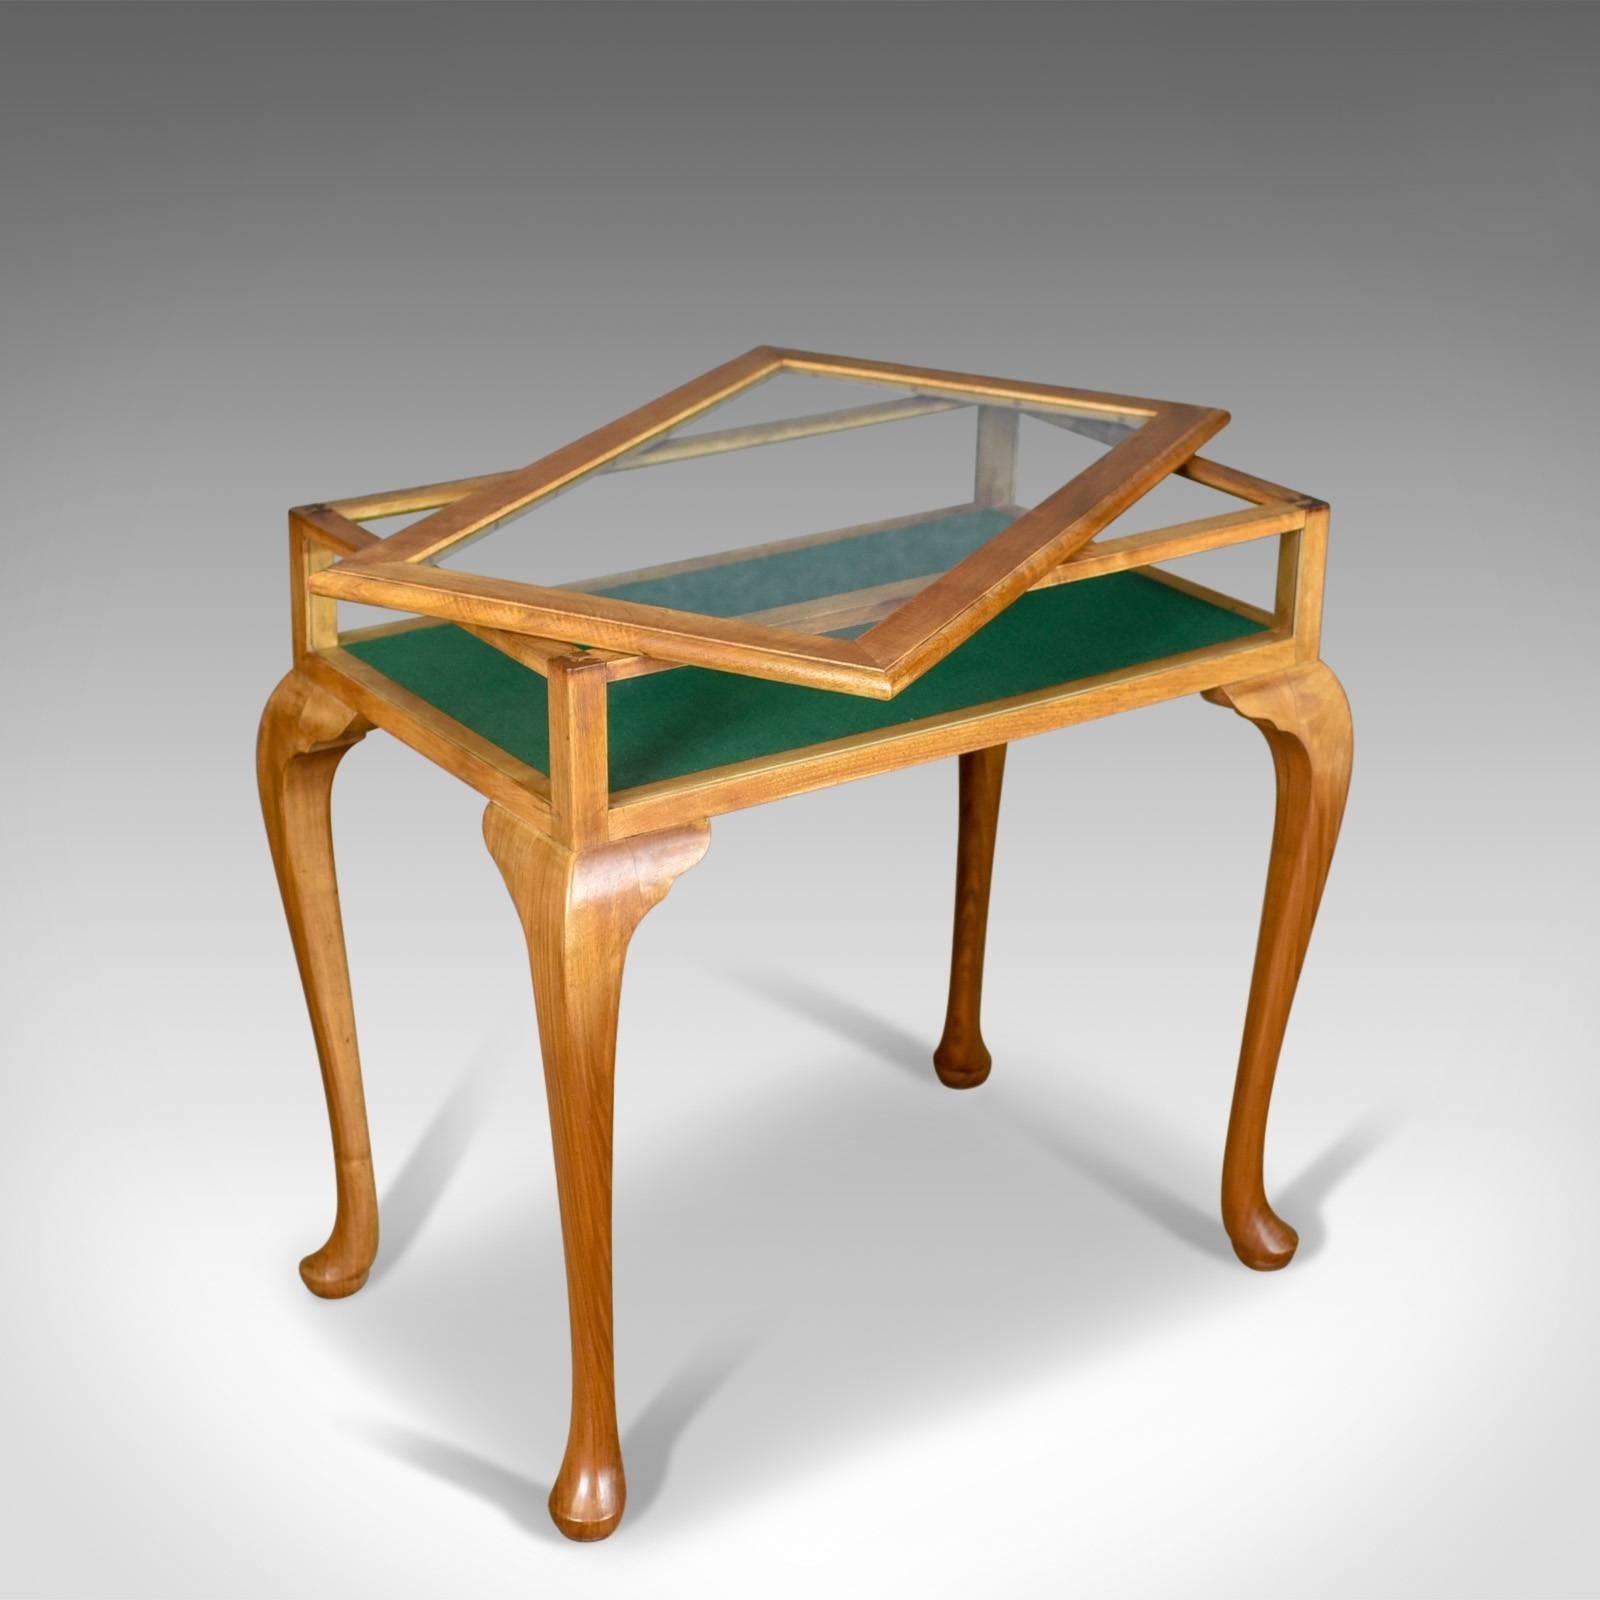 Vintage Bijouterie Table, 20th Century Display Case, Light Mahogany, 1993 (Englisch)